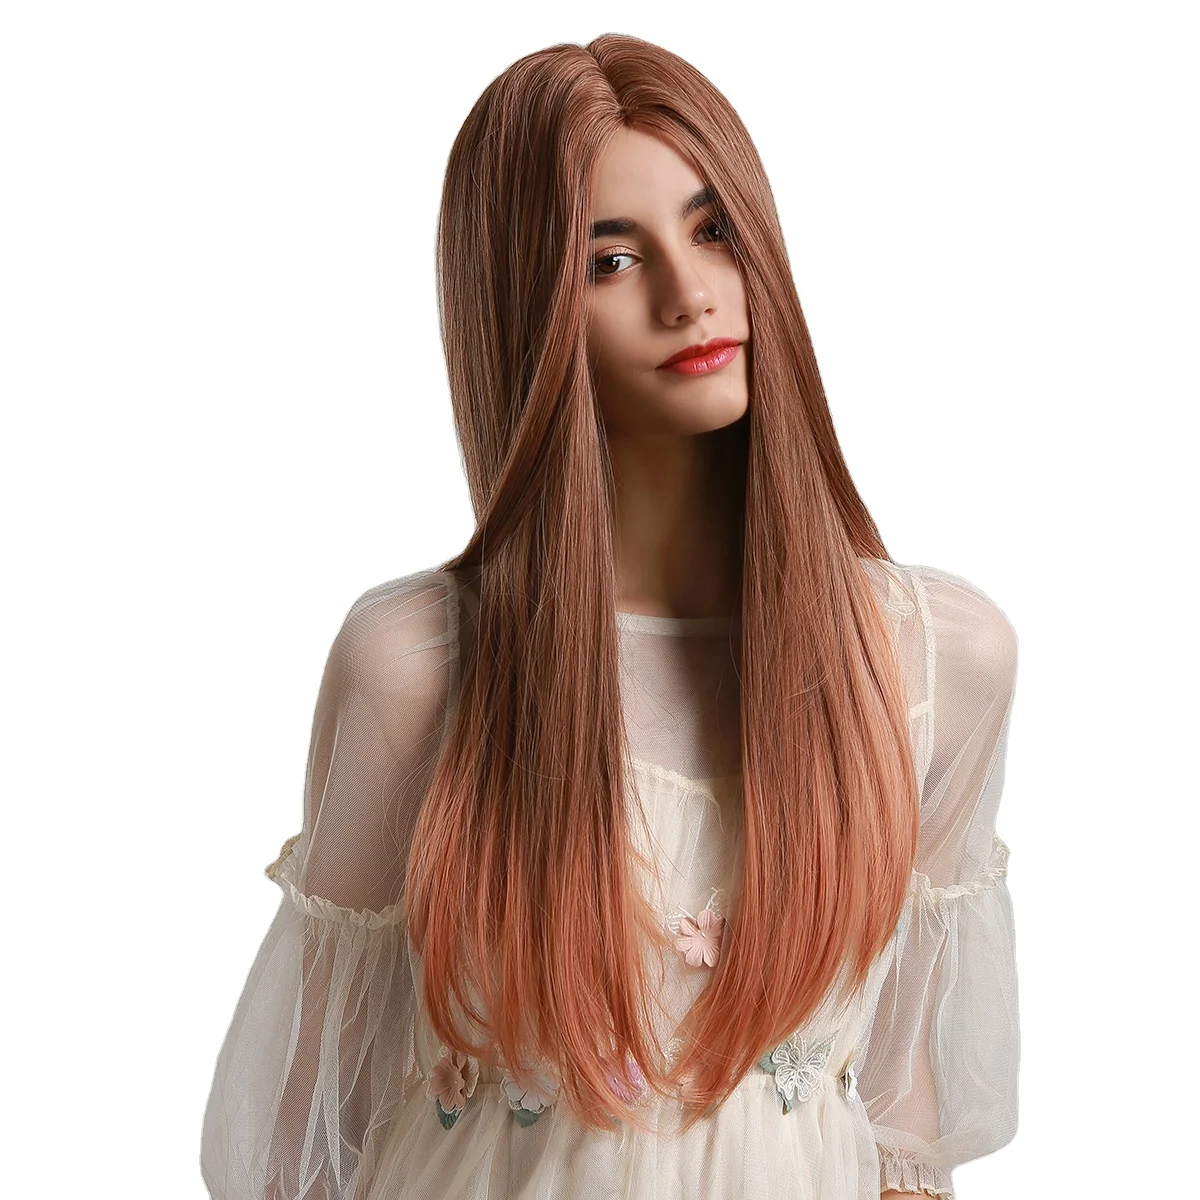 

BVR 26 Inch High Temperature Fiber Synthetic Wigs Brown Gradient Ombre Wig Without Bangs For Cosplay Party